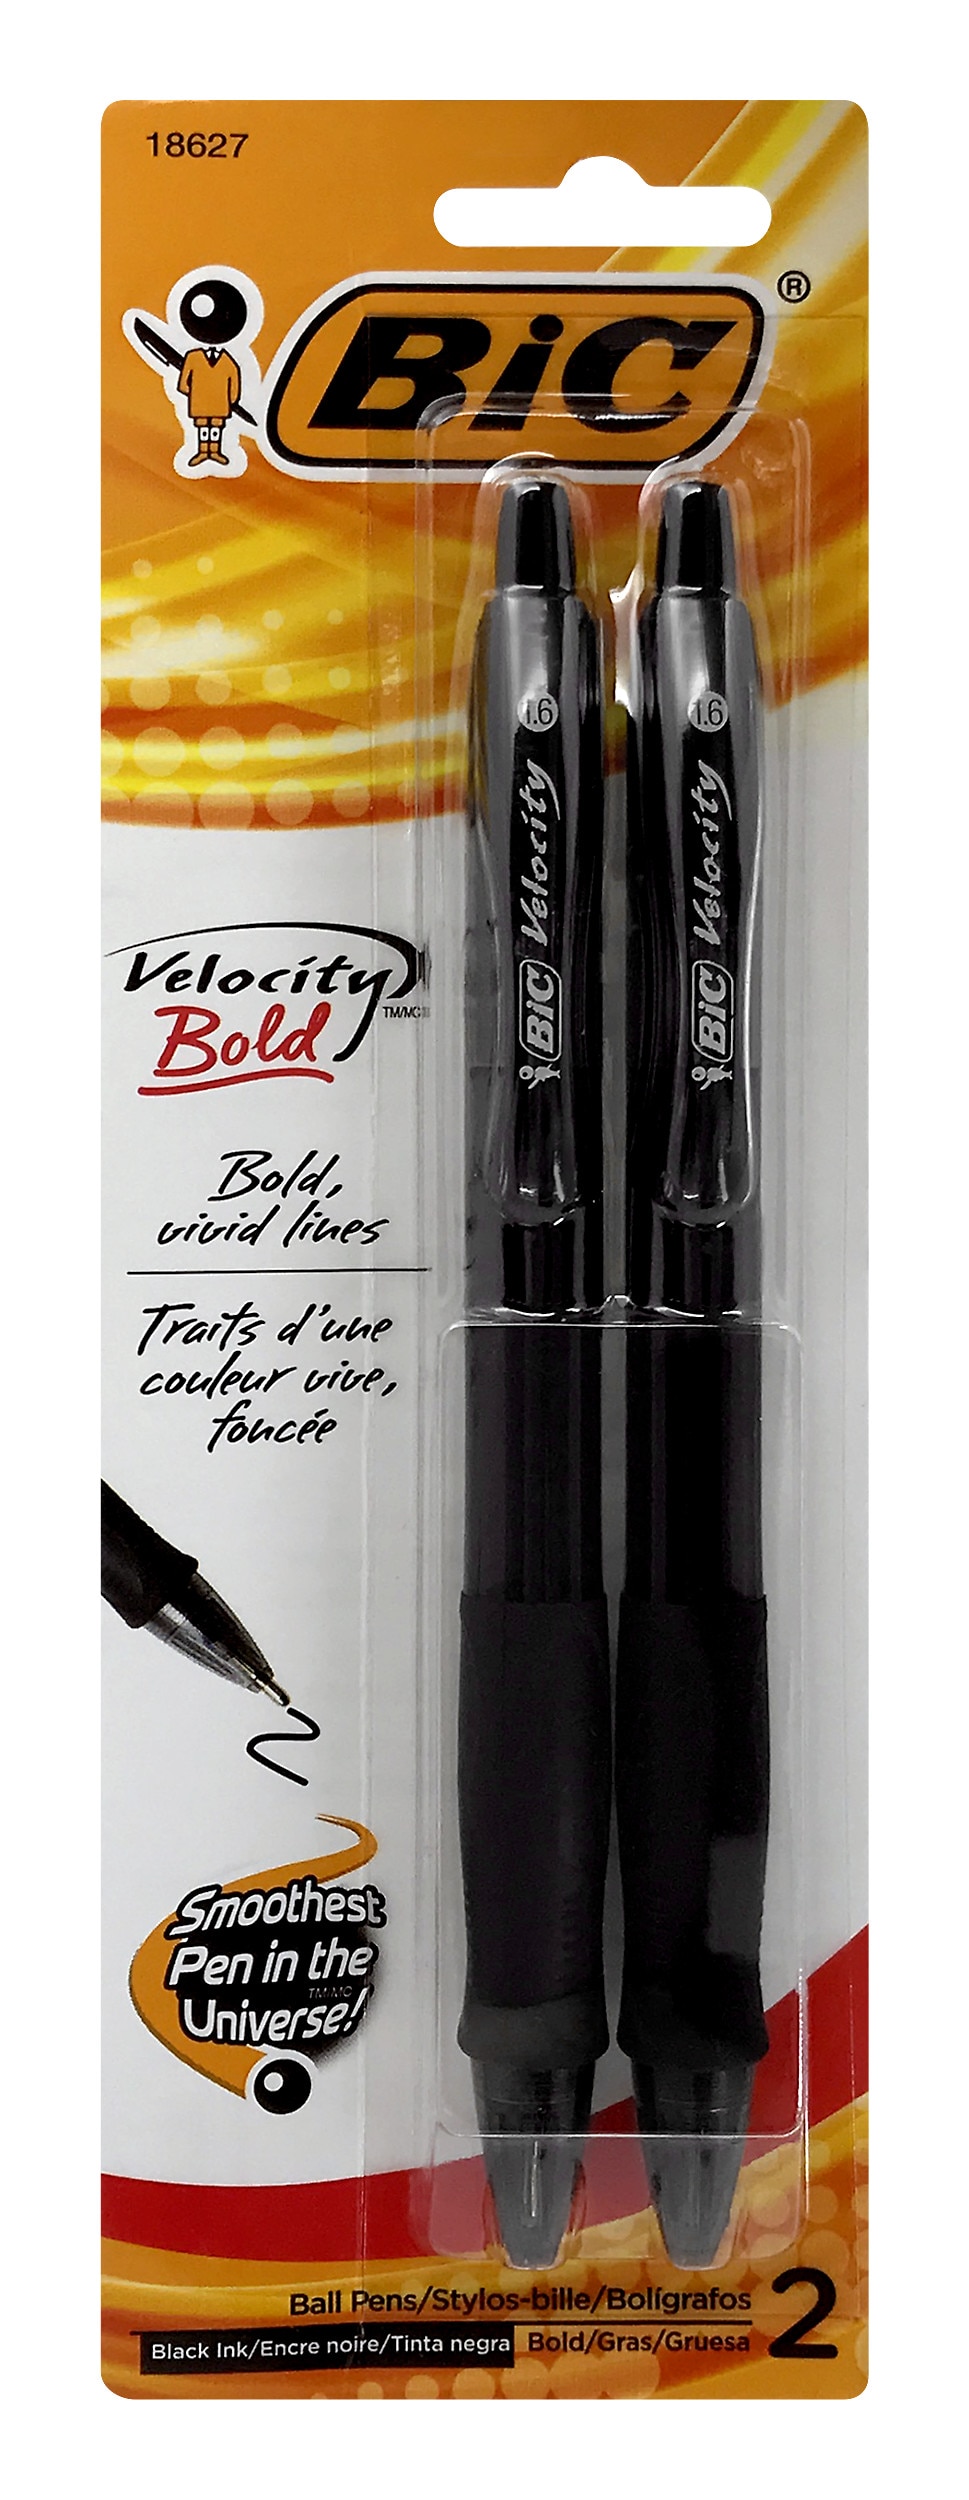 BIC Velocity Bold Retractable Ball Pen Bold Point (1.6mm) Black 2-Count 